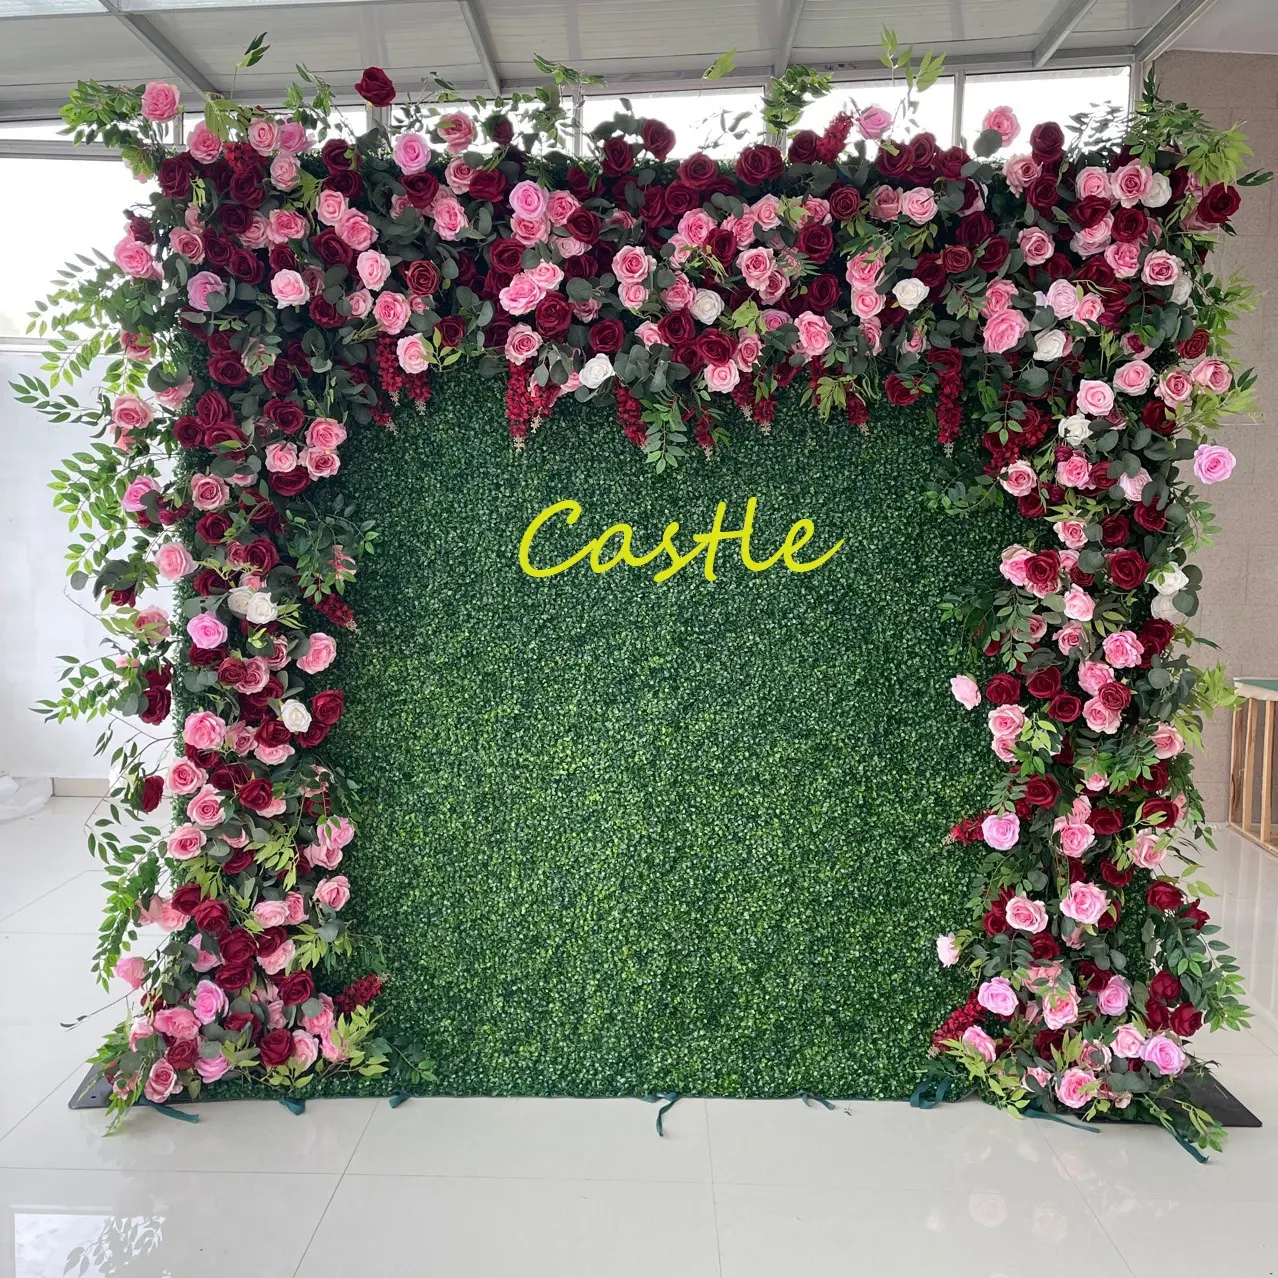 O-W044 5D White Rose Peony Hydrangea Cloth Roll Up Flower Wall Fabric Hanging Curtain Plant Wall Event Party Wedding Backdrop De